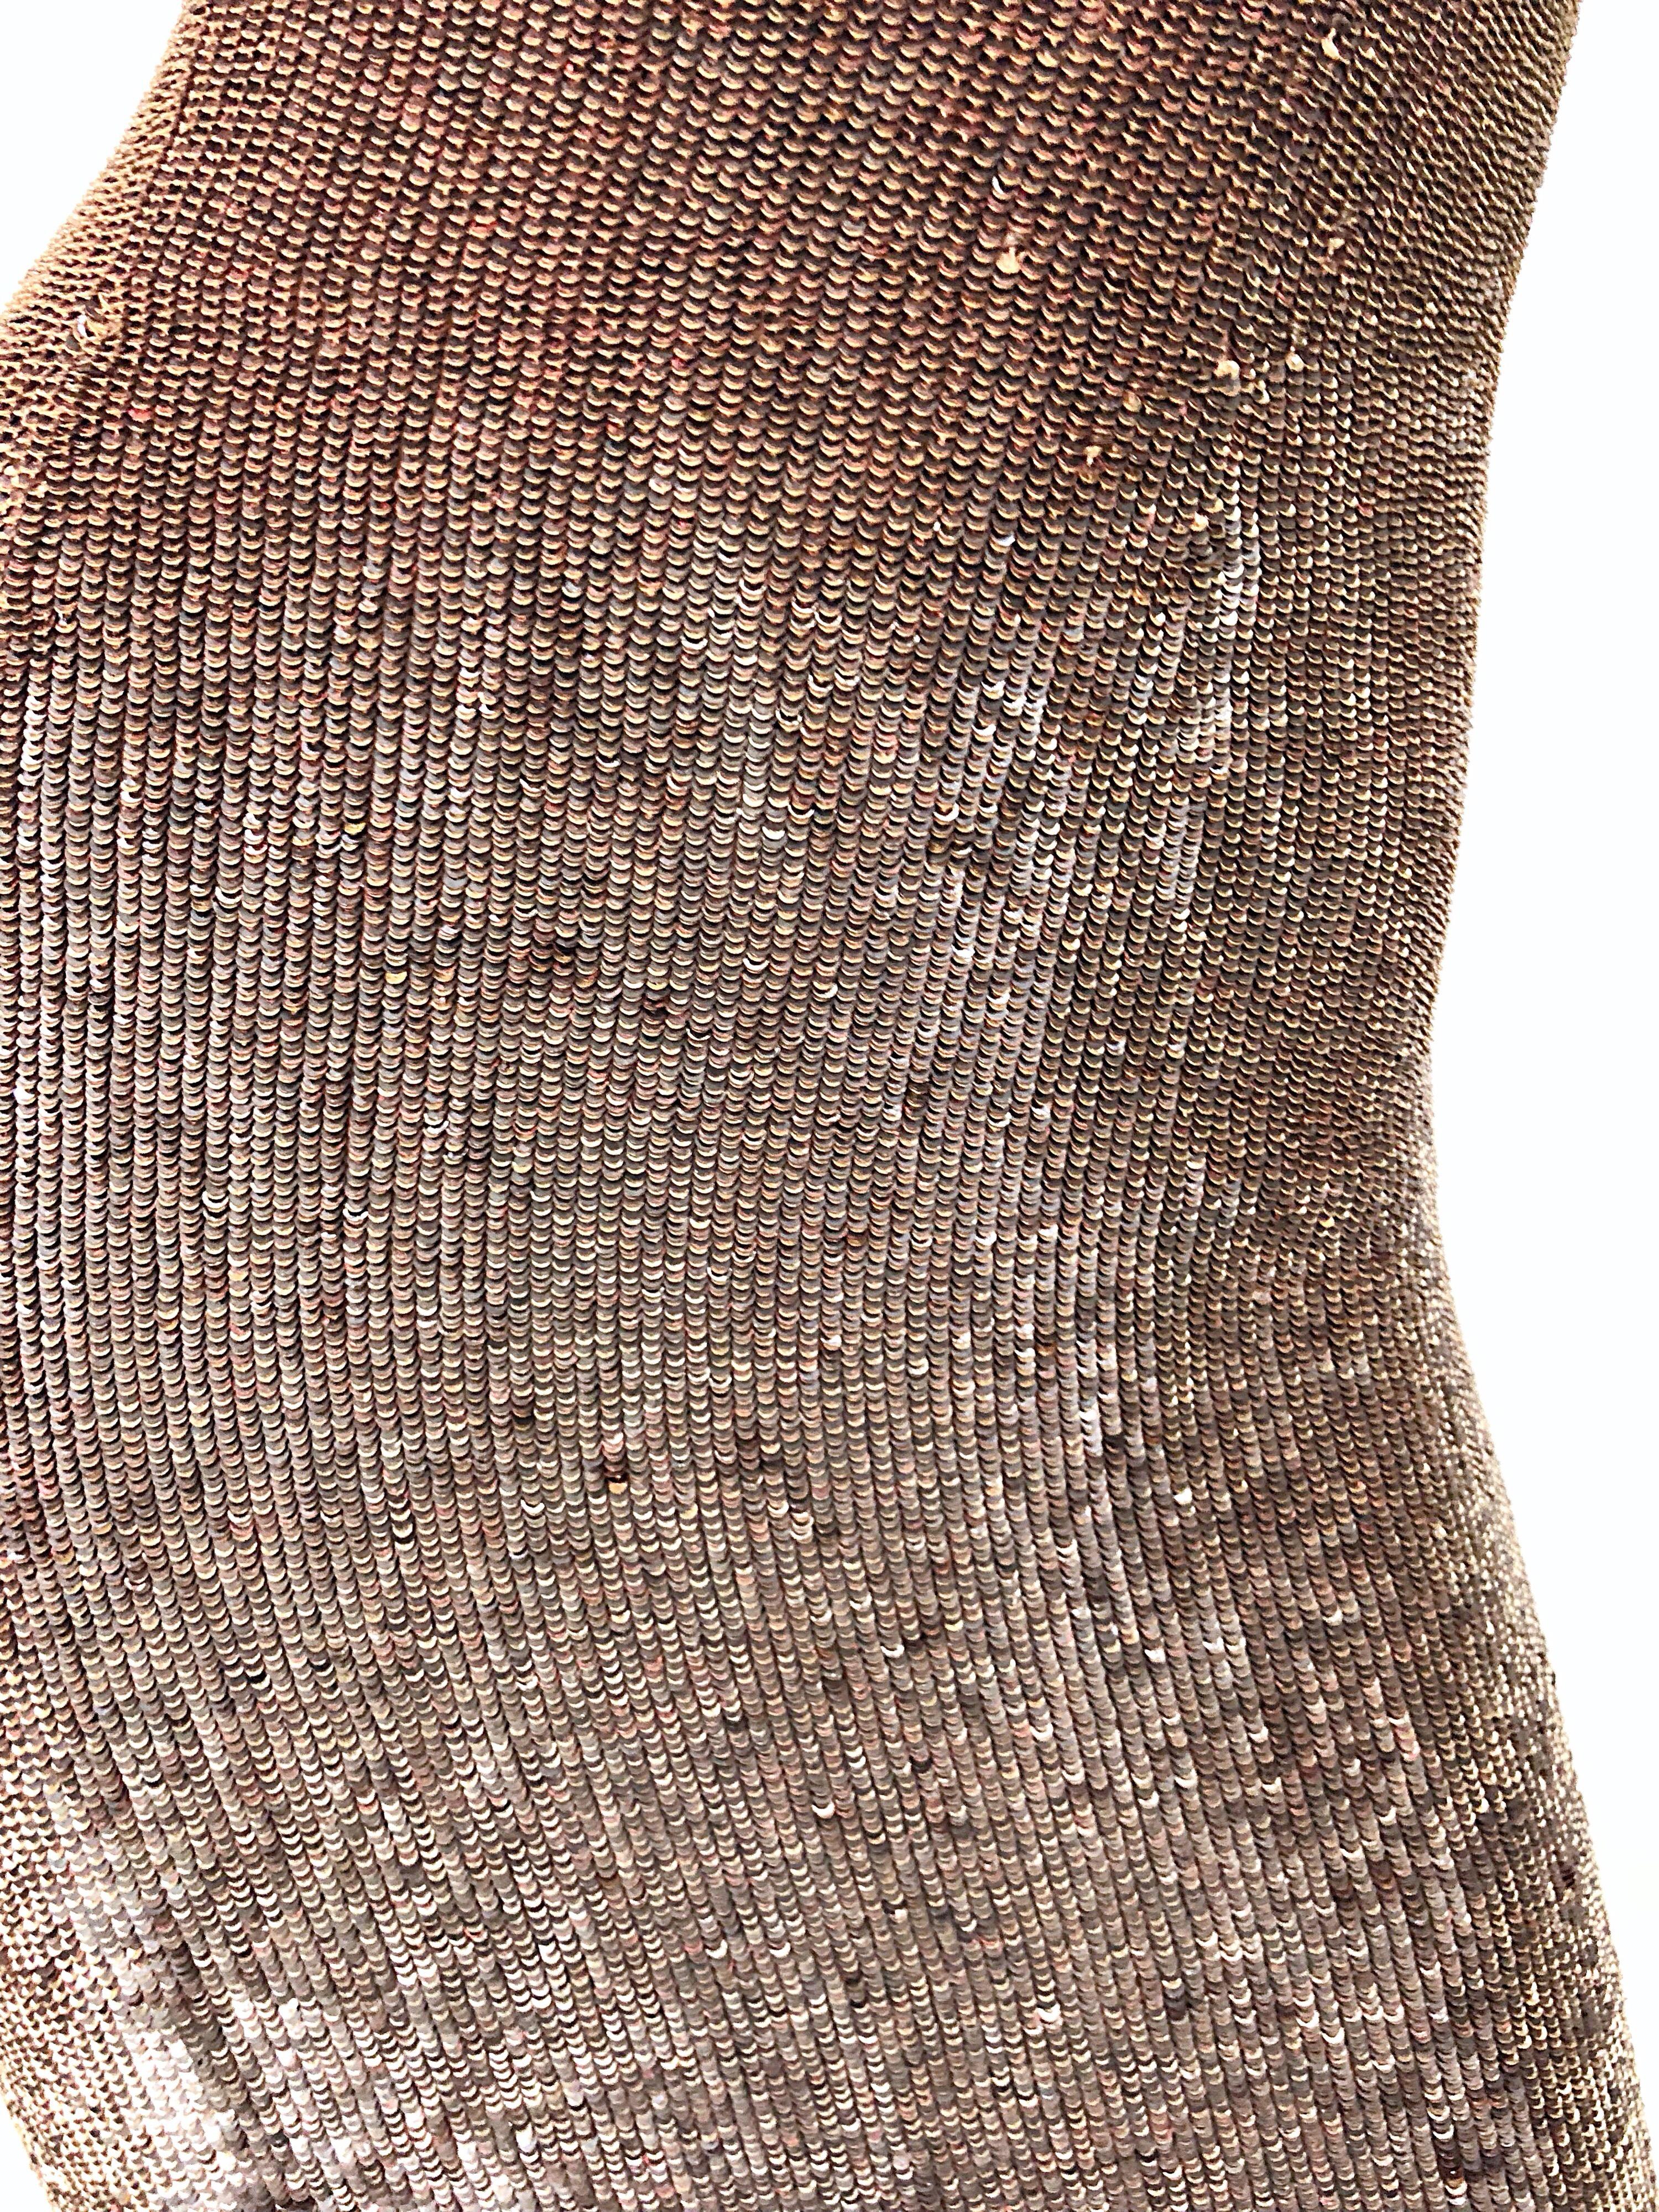 Bill Blass Early 2000s Silk Chiffon Brown Bronze Fully Sequined Sheath Dress In New Condition For Sale In San Diego, CA